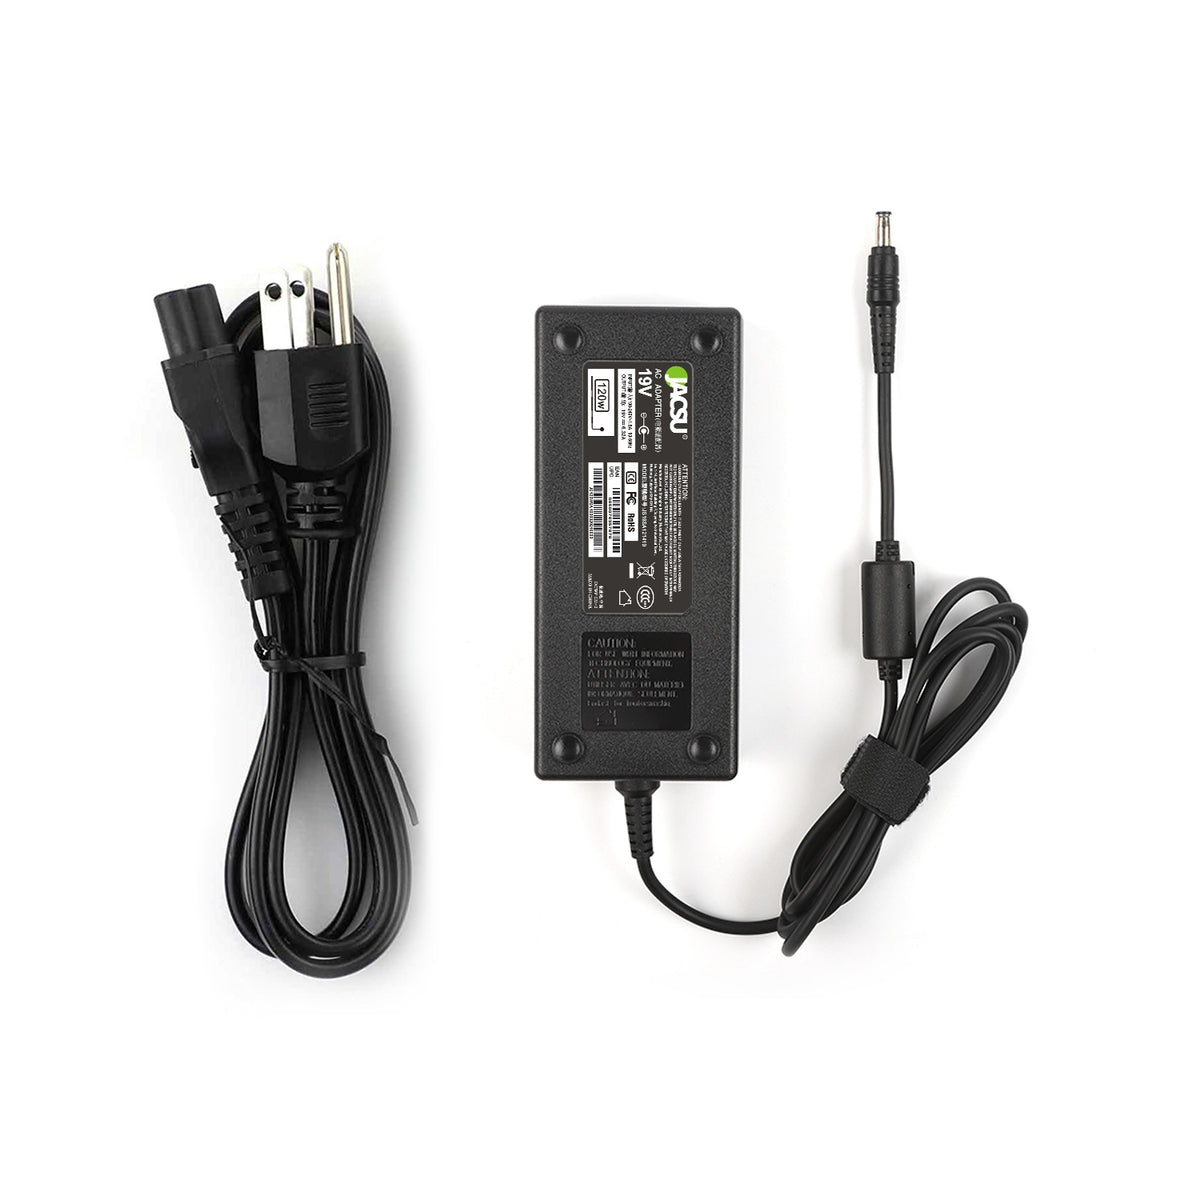 Jacsu 120W 19V 6.32A 5.5X3.0mm AC Adapter/Charger For SAMSUNG Laptop ALL IN ONE SERIES,R70,R508,R560